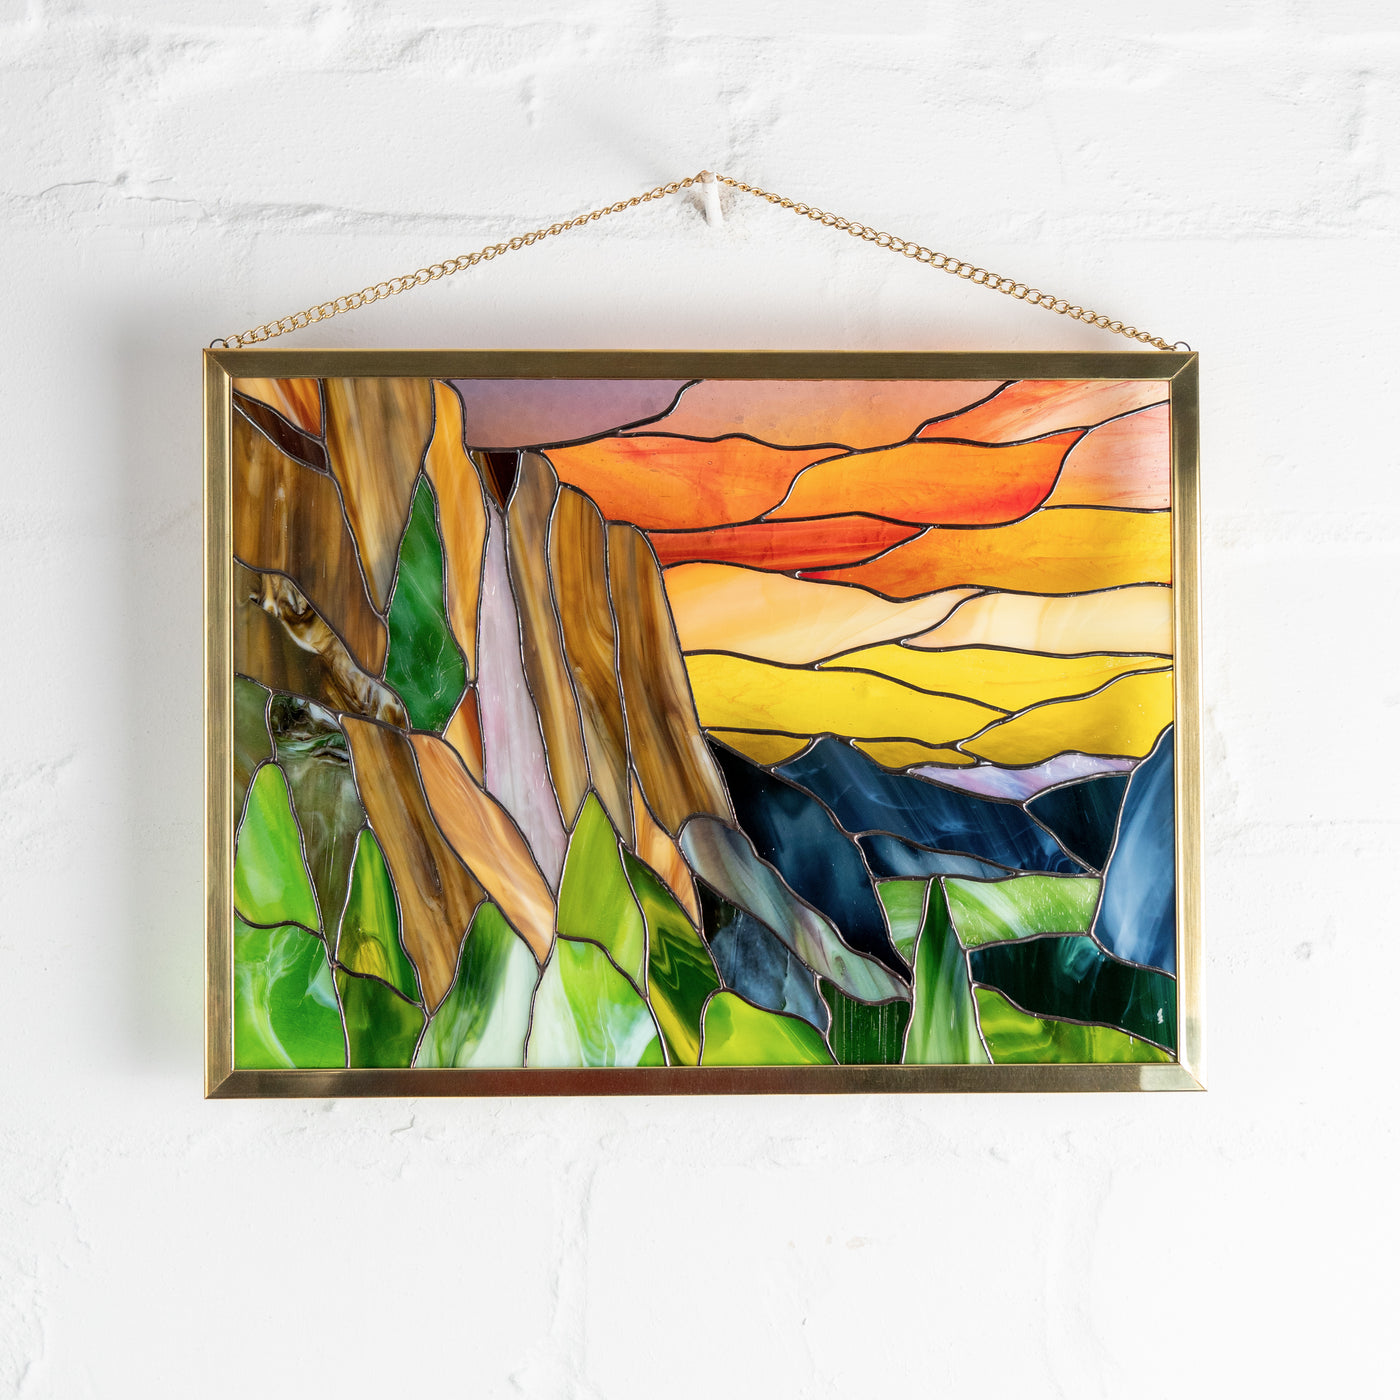 Yosemite stained glass handmade decor for home